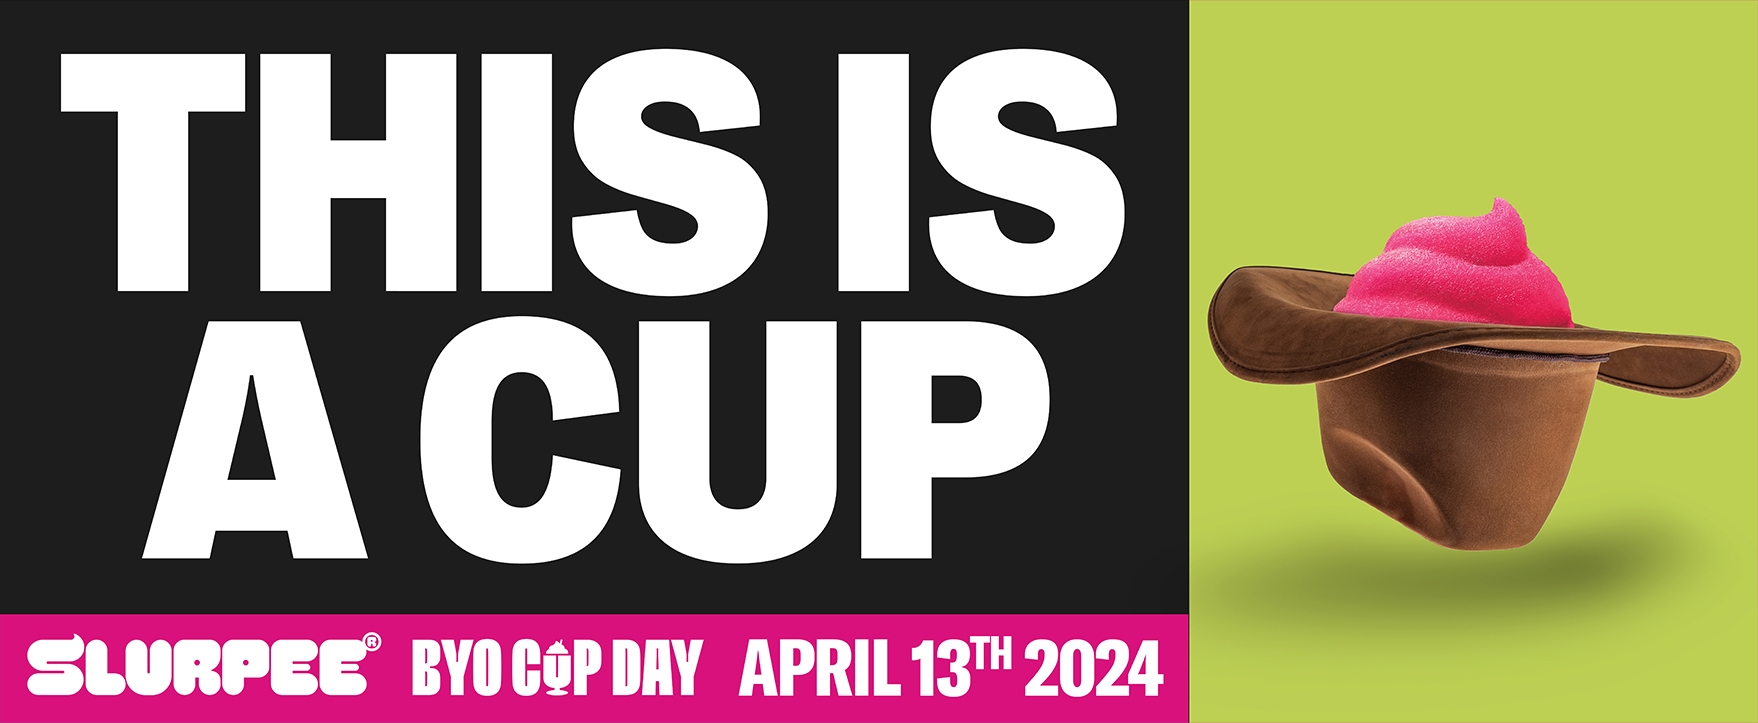 7-Eleven, Inc. Kicks Off Slurpee Season with Bring Your Own Cup Day on April 13